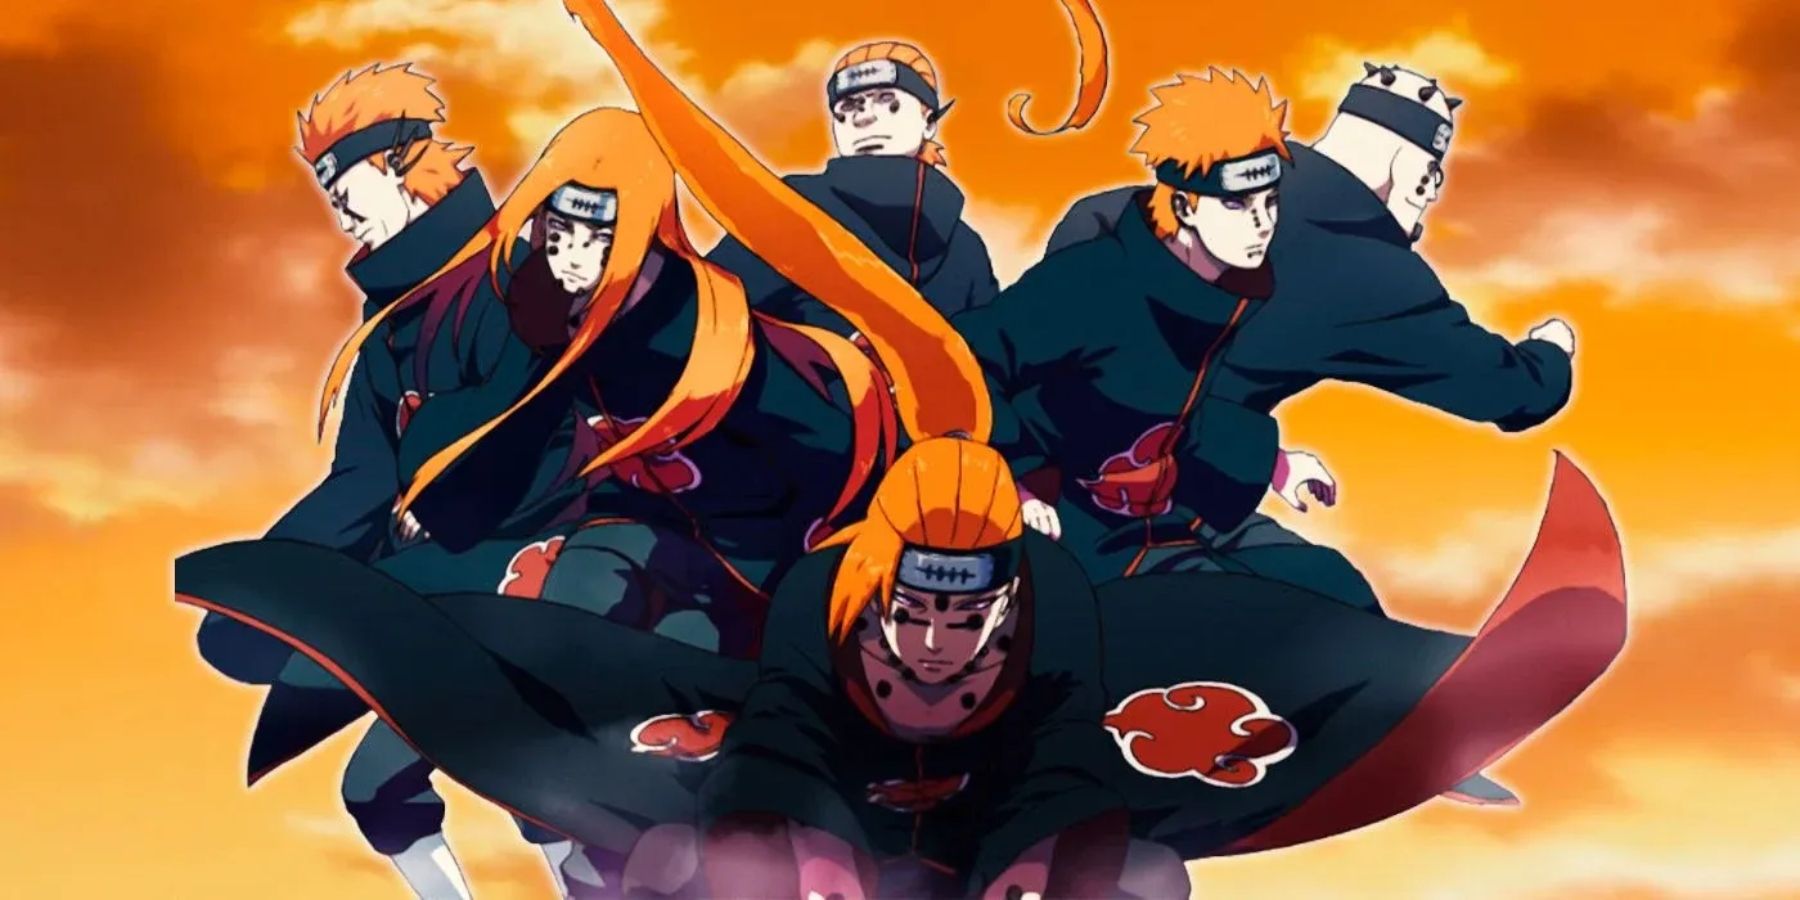 Naruto: Who Were the Vessels of the Six Paths of Pain?